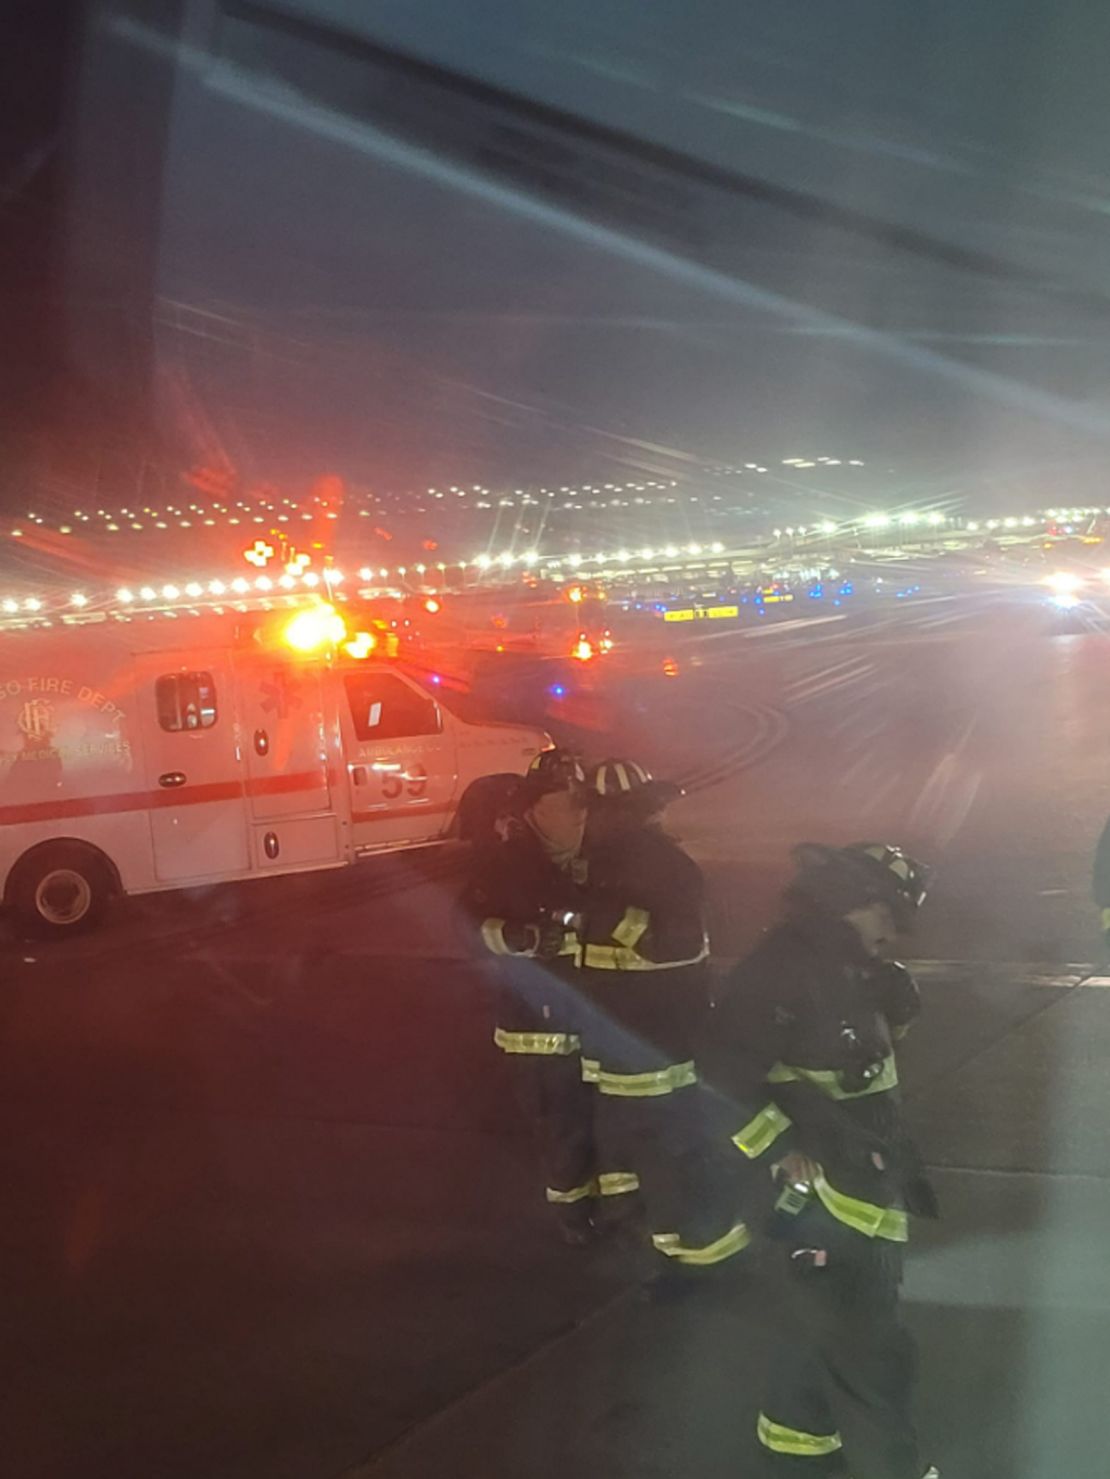 Looking out a window from his seat on the plane, passenger Kevis Mitchell took his photo of emergency responders arriving after the collision. 